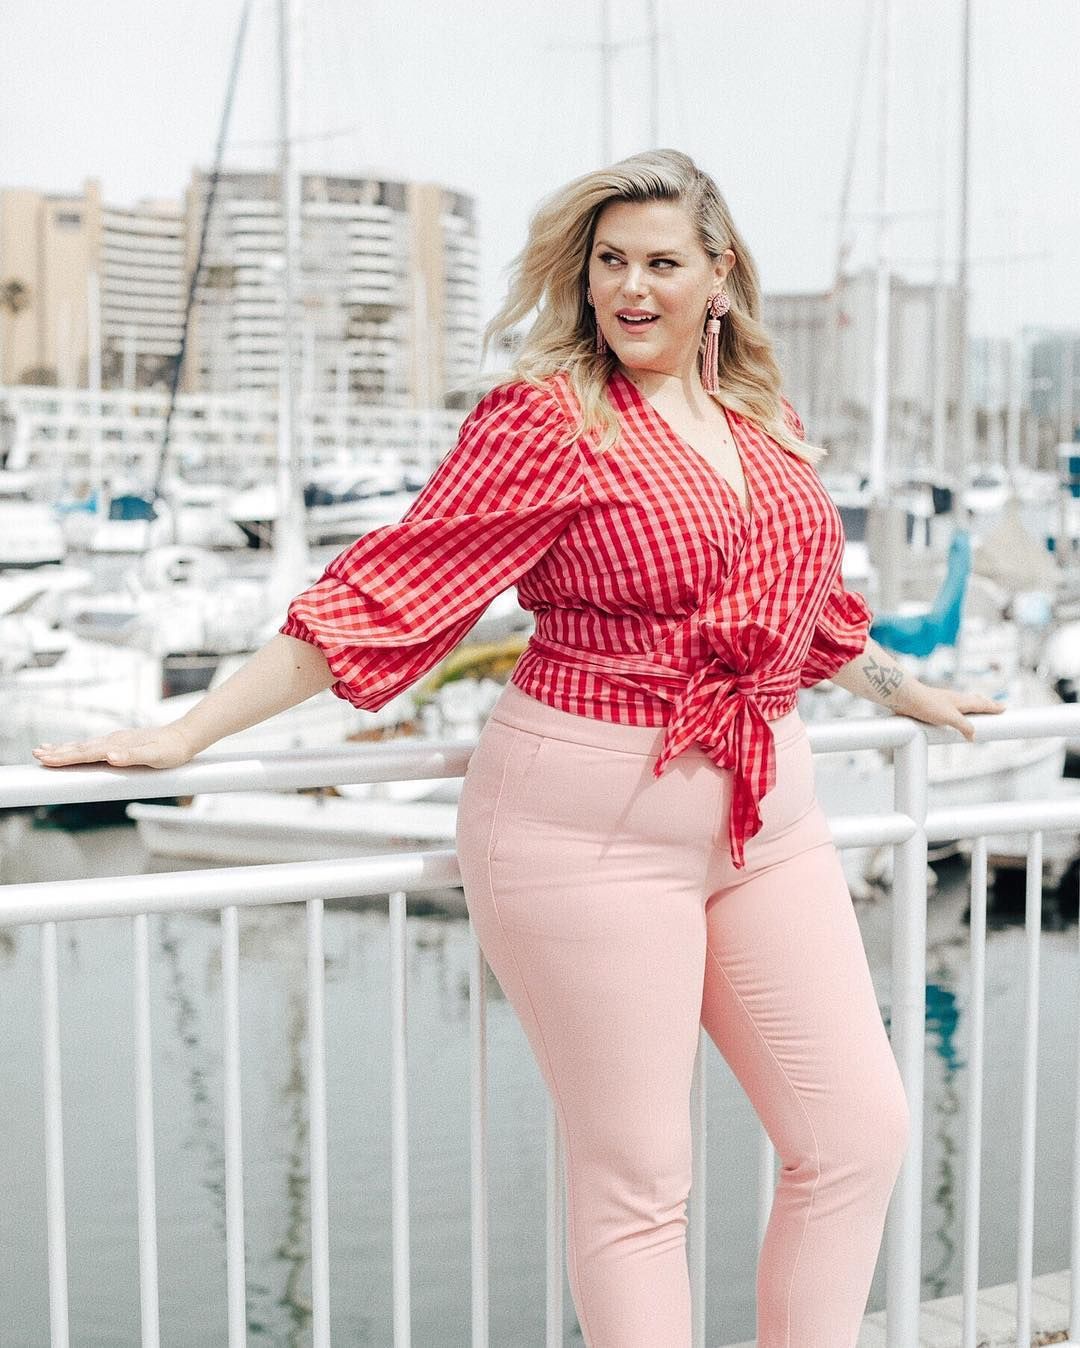 10 Plus Size Influencers You Want To Follow Nakedlydressed